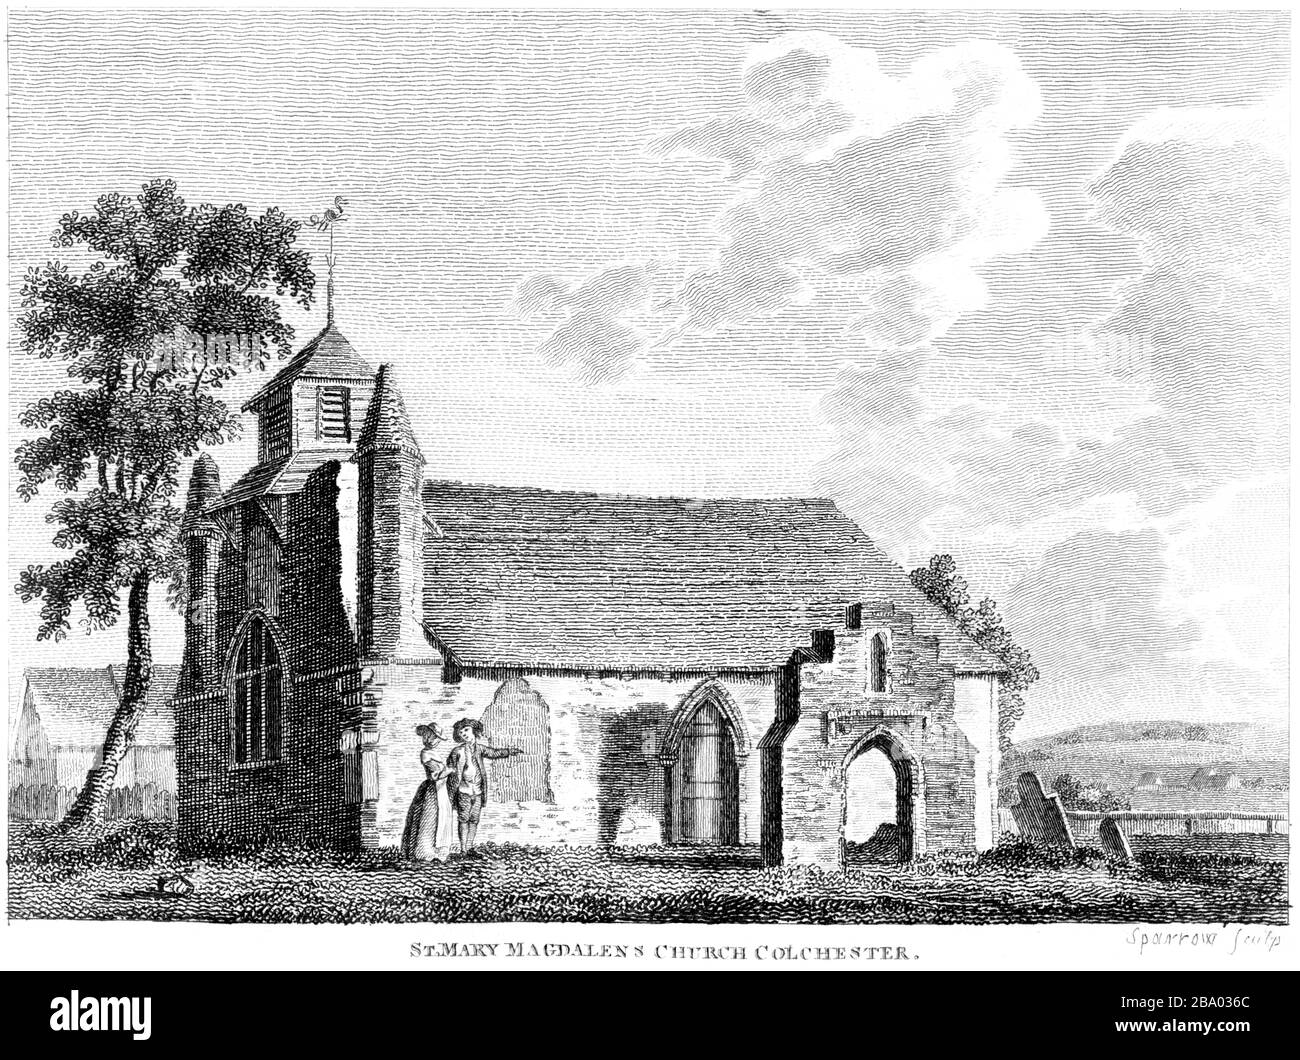 An engraving of St Mary Magdalens Church Colchester scanned at high resolution from a book published around 1786.  Believed copyright free. Stock Photo